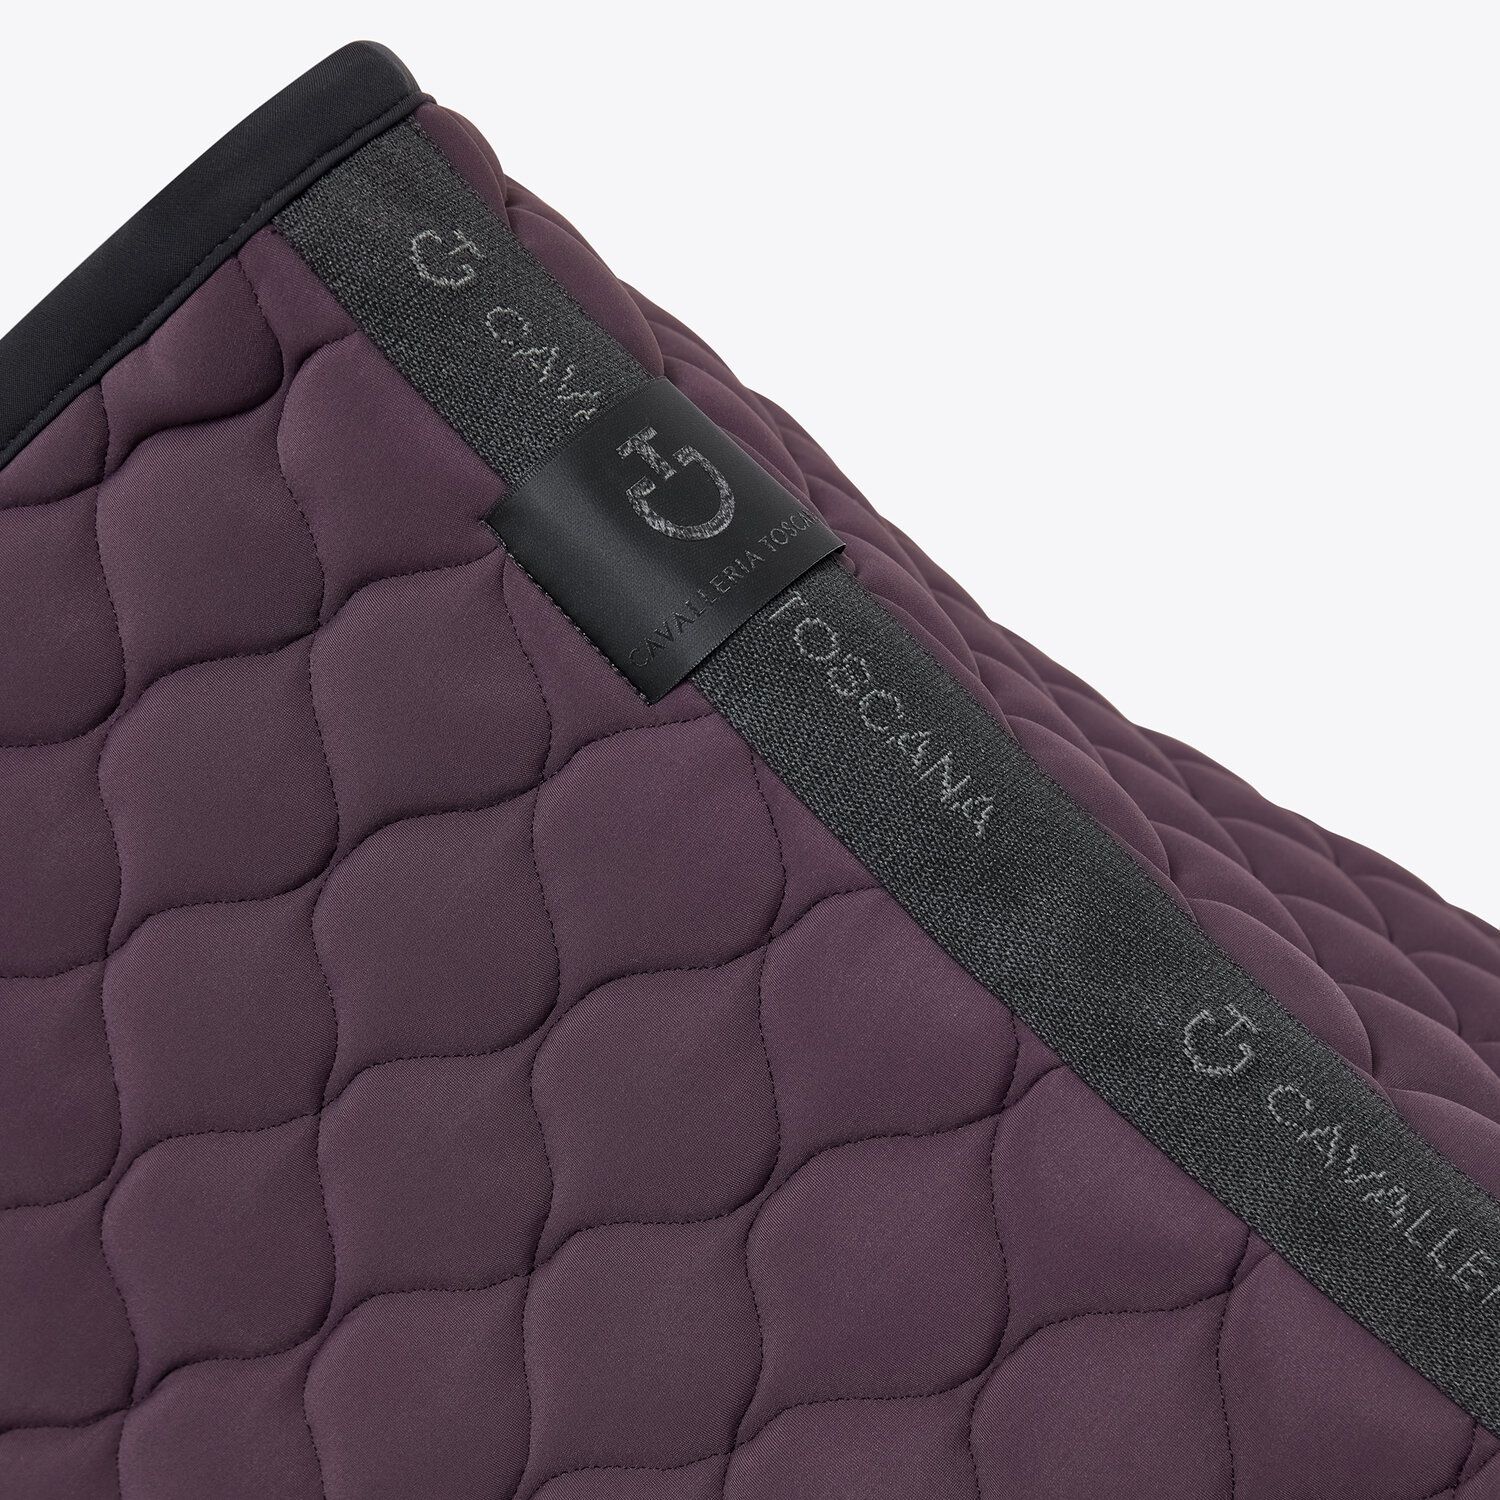 The Cavalleria Toscana dark purple saddle pad is cut for an anatomic fit to ensure the comfort of your horse, and security over every obstacle on the course. The outer face in performance fabric is lined with a thin layer of padding and breathable, antibacterial waffle-texture cotton fabric. 